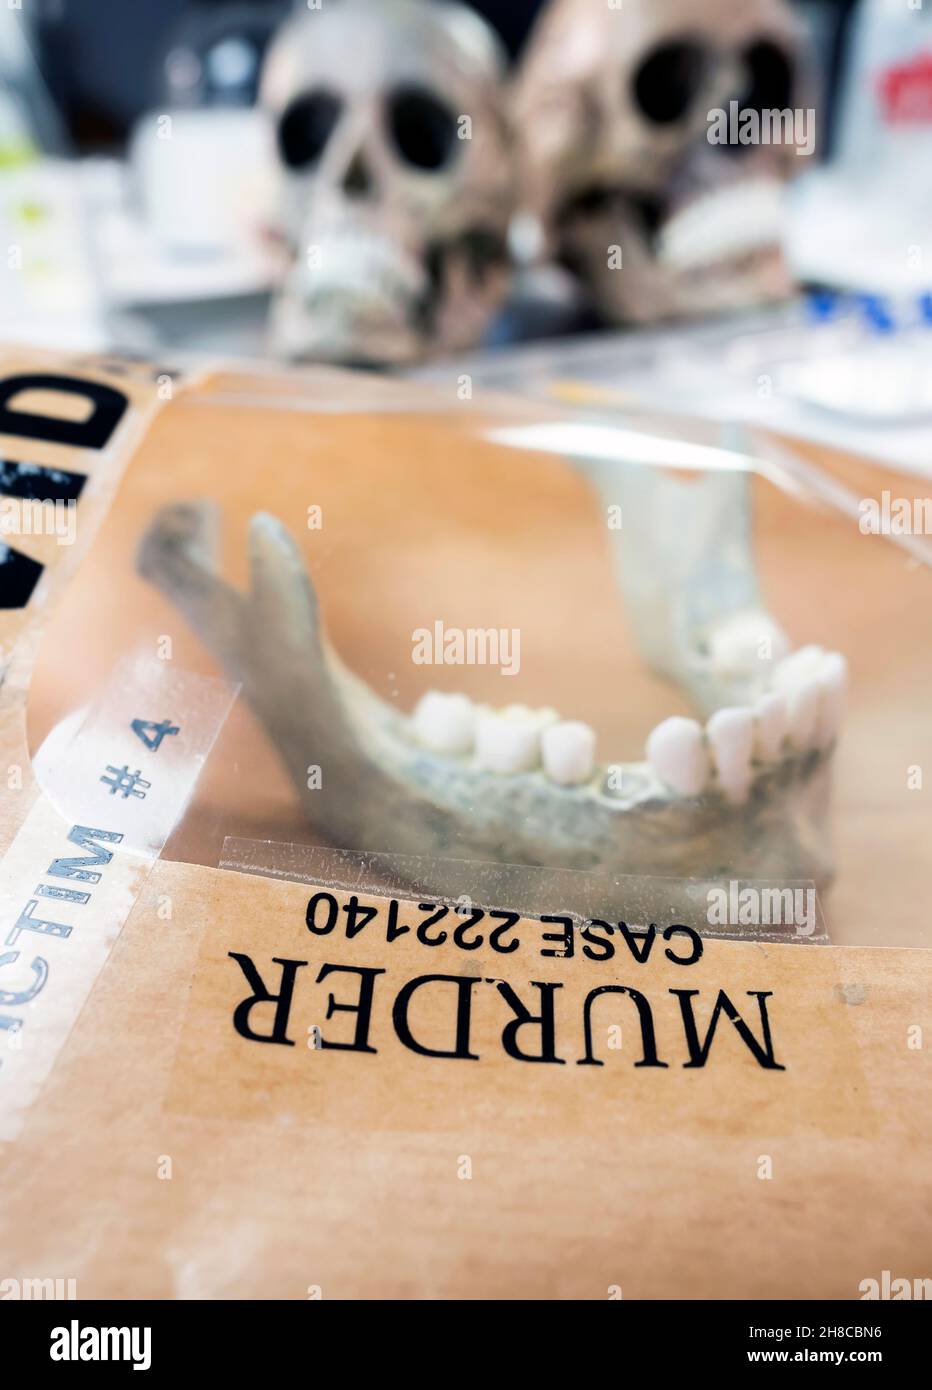 Evidence bag with human lower jaw in forensic lab murder investigation, conceptual image Stock Photo